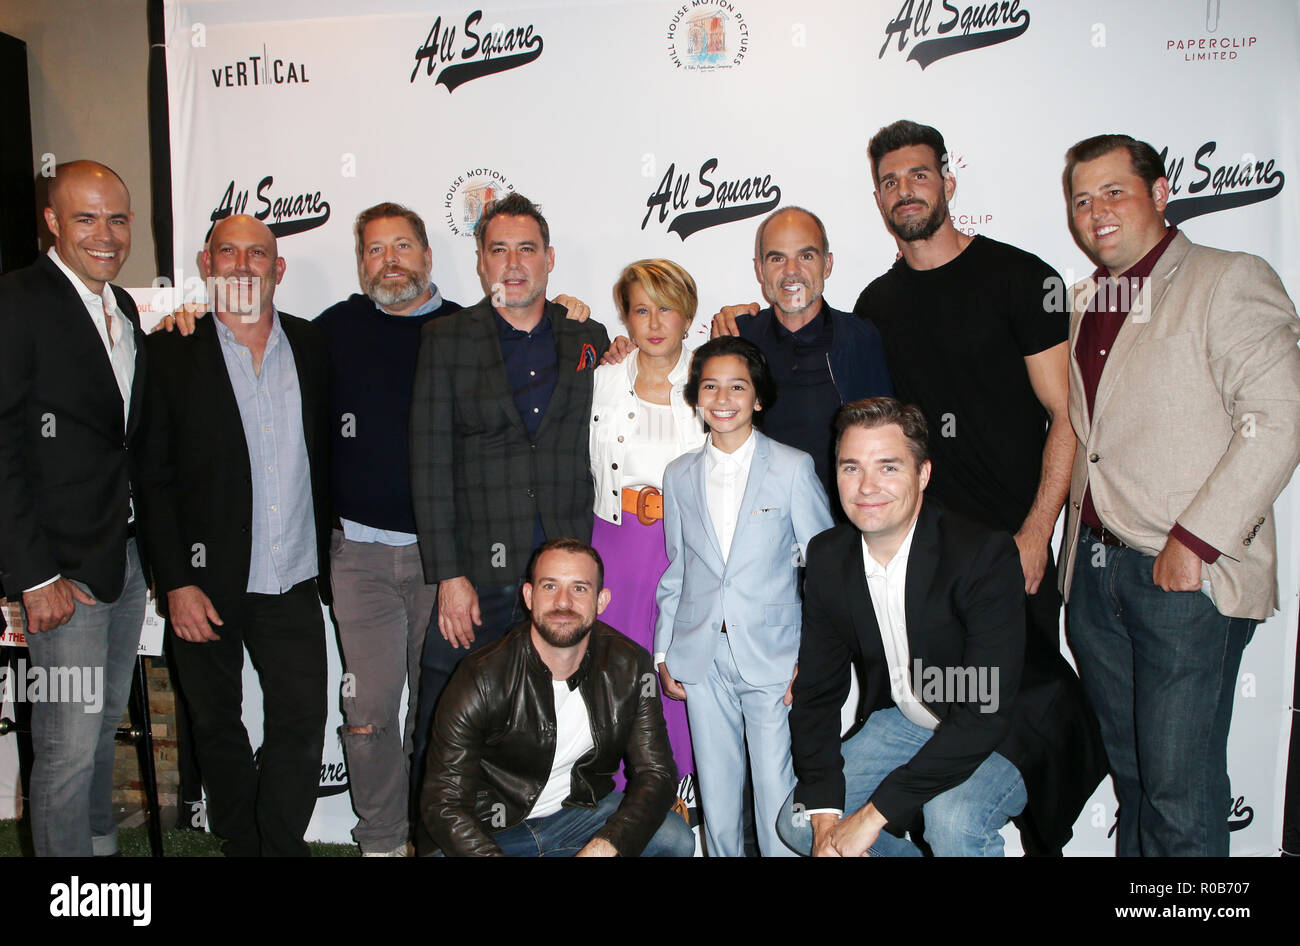 LA PREMIERE PLACE POUR TOUS Avec : Ben Cornwell, Johm Hyams, Andrew Sikking, Yeardley Smith, Jesse Ray Sheps, Michael Kelly, Brett Davis, Nick Smith Où : Westwood, California, United States Quand : 02 Oct 2018 Credit : FayesVision/WENN.com Banque D'Images